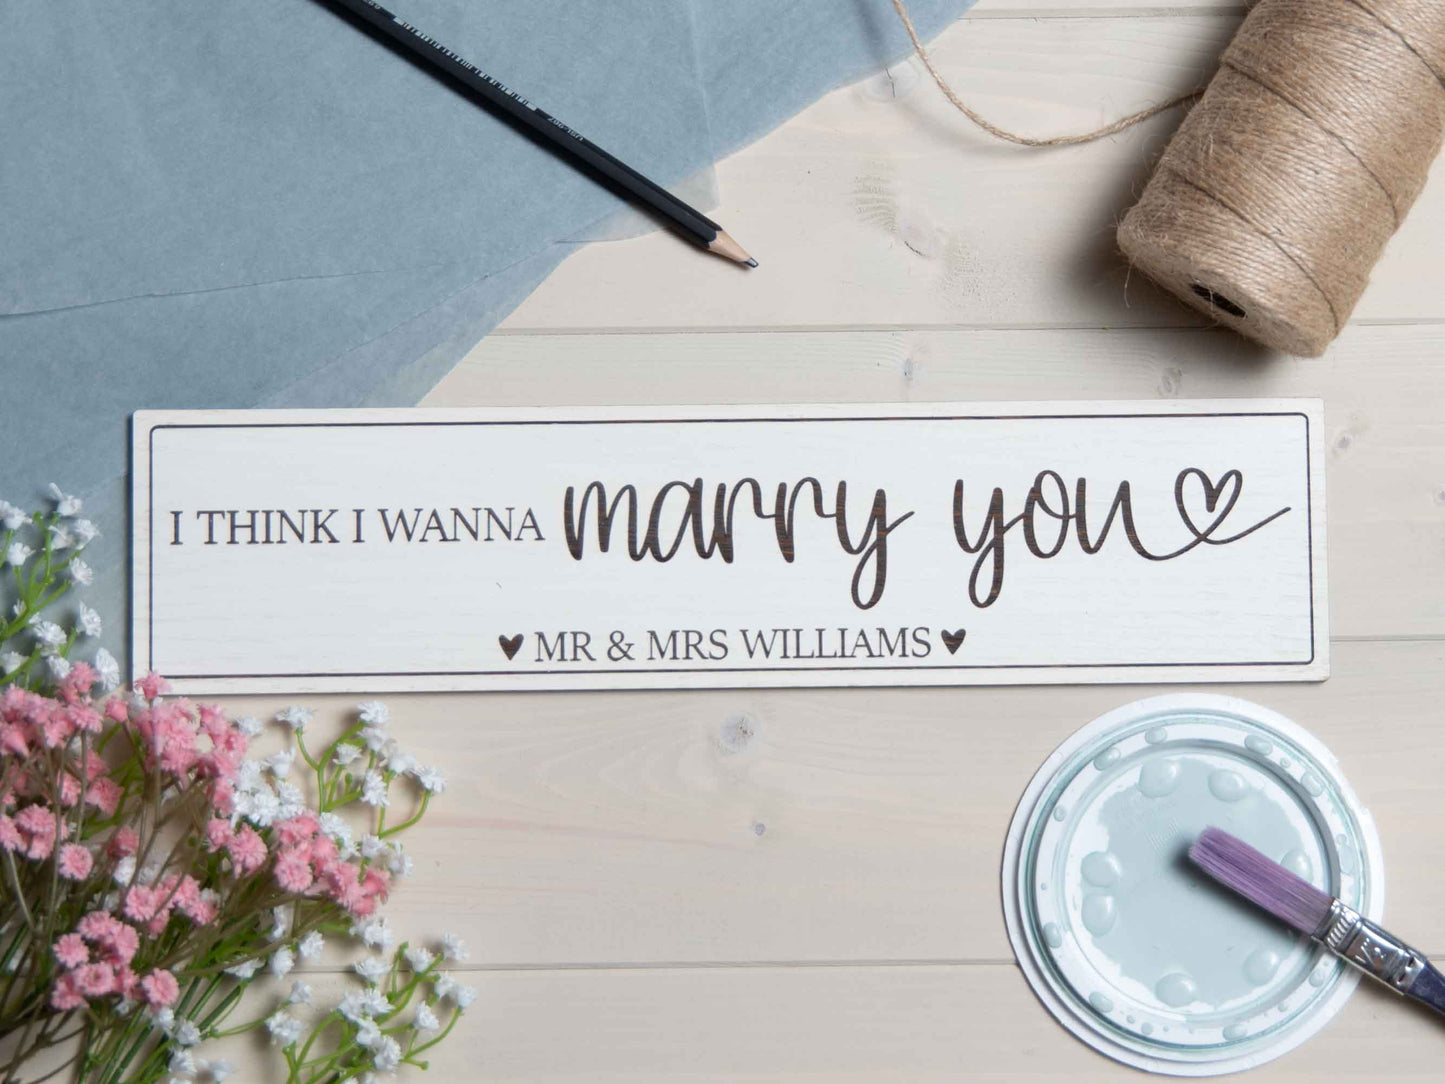 I think I wanna marry you sign plaque